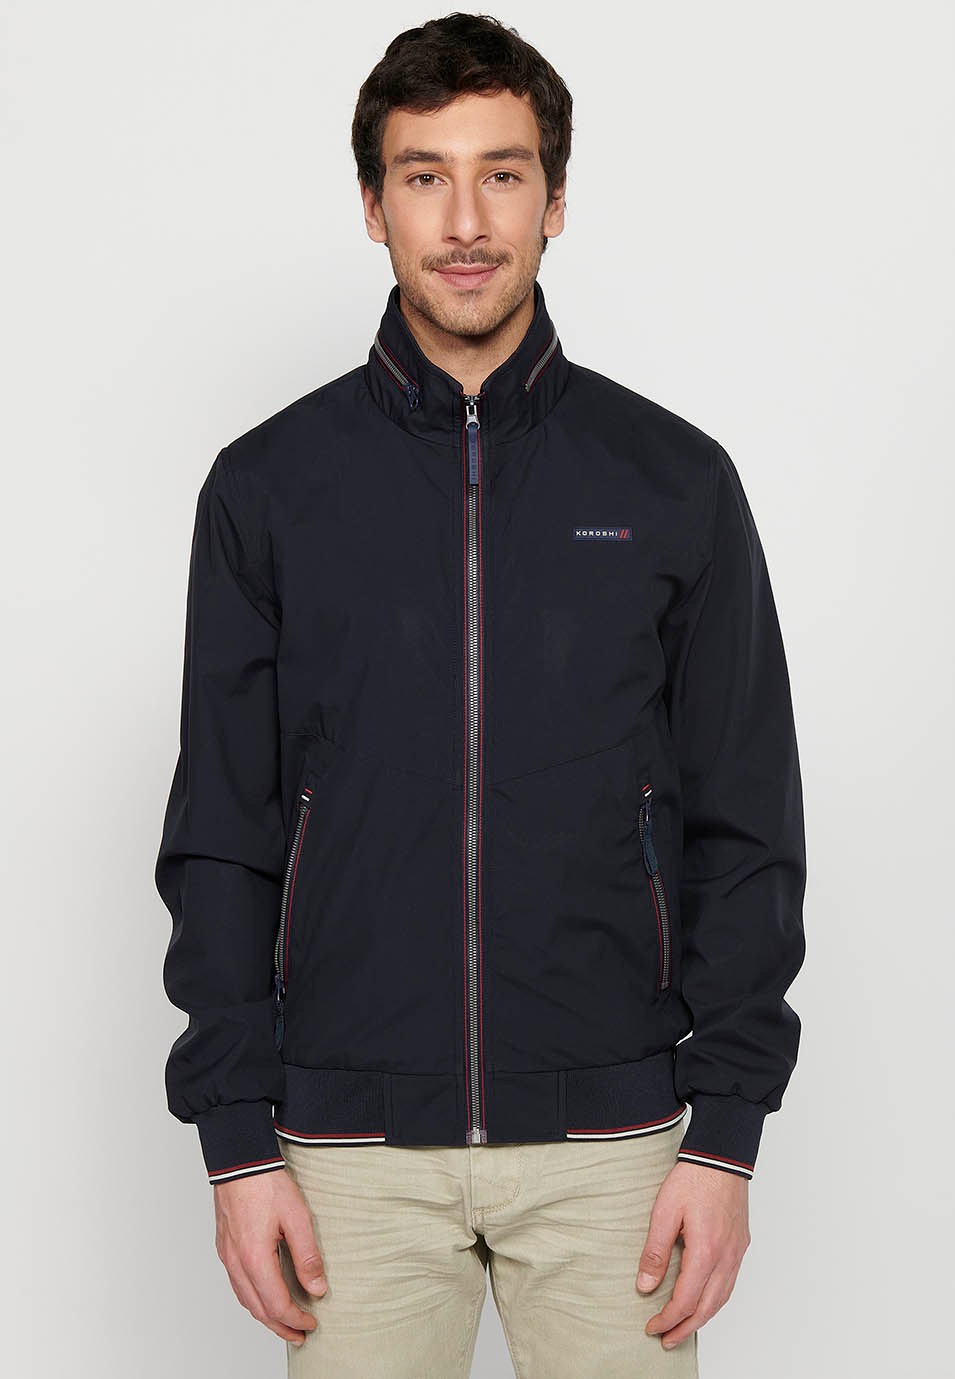 Long-sleeved high-neck jacket with front zipper closure and ribbed finishes with pockets, one inside in Navy for Men 1